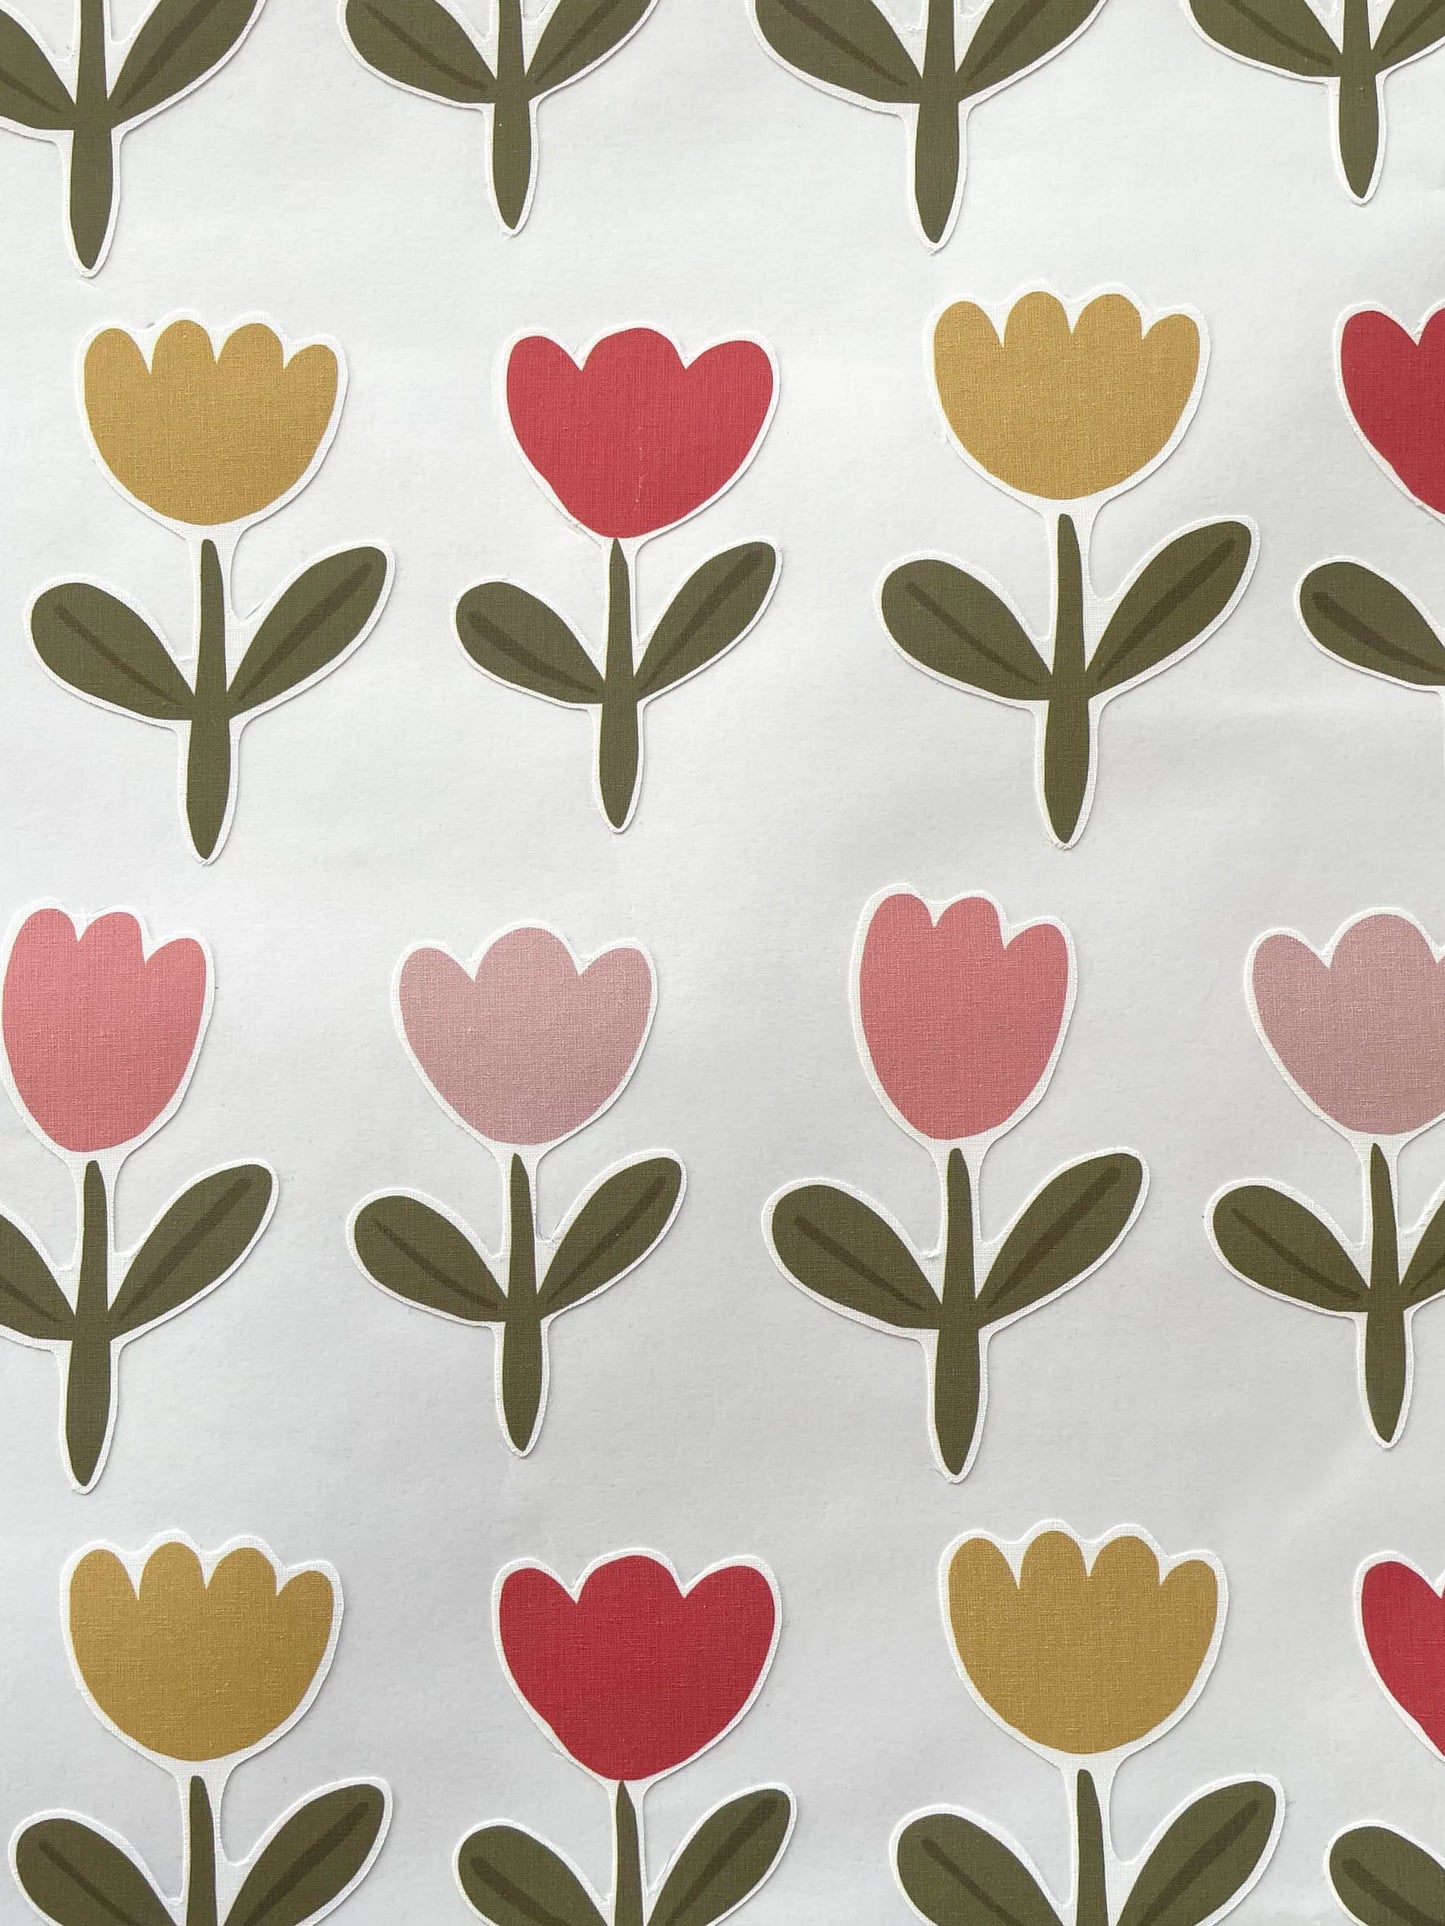 Tulip Flower Wall Stickers | Eco-Friendly, Removable, Reusable, Fabric Wall Stickers